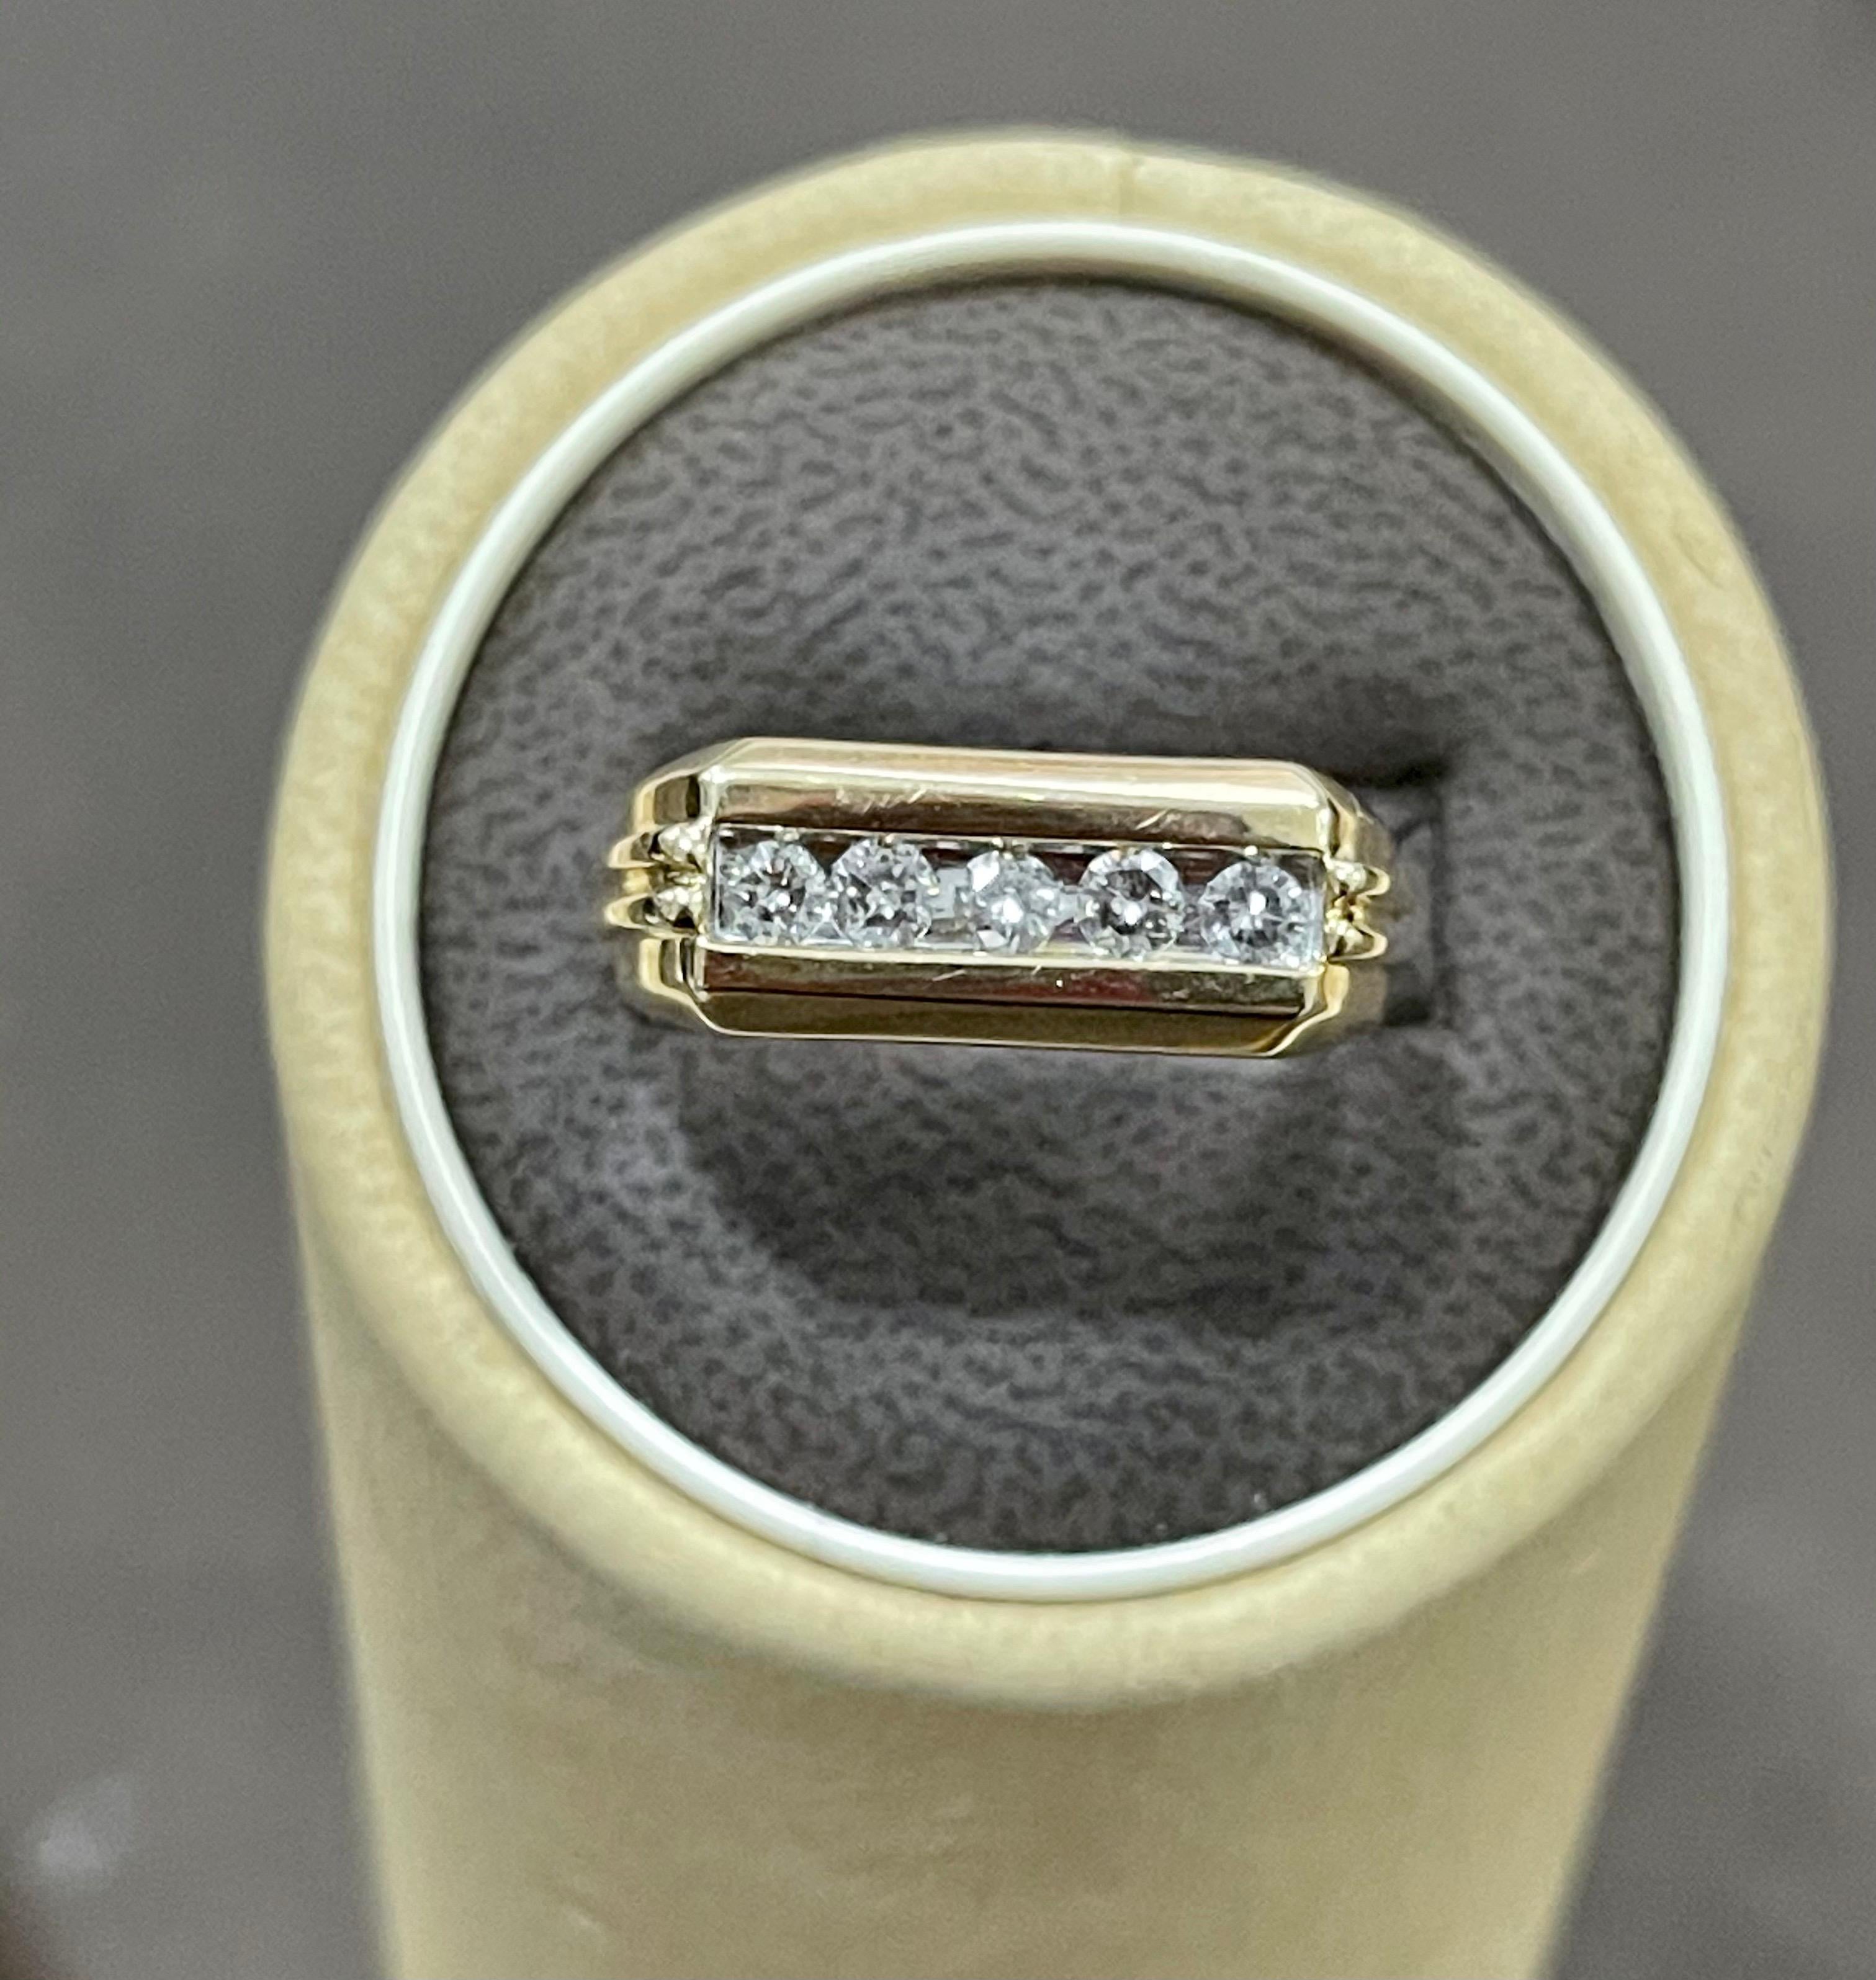 5 Diamonds , Unisex 1-Row Diamond Band Ring in 10 Karat Yellow Gold Size 10
This is a open setting or channel setting ring from our affordable premium wedding collection.
5 round diamonds Eye Clean quality are set in a row in 10 karat yellow gold